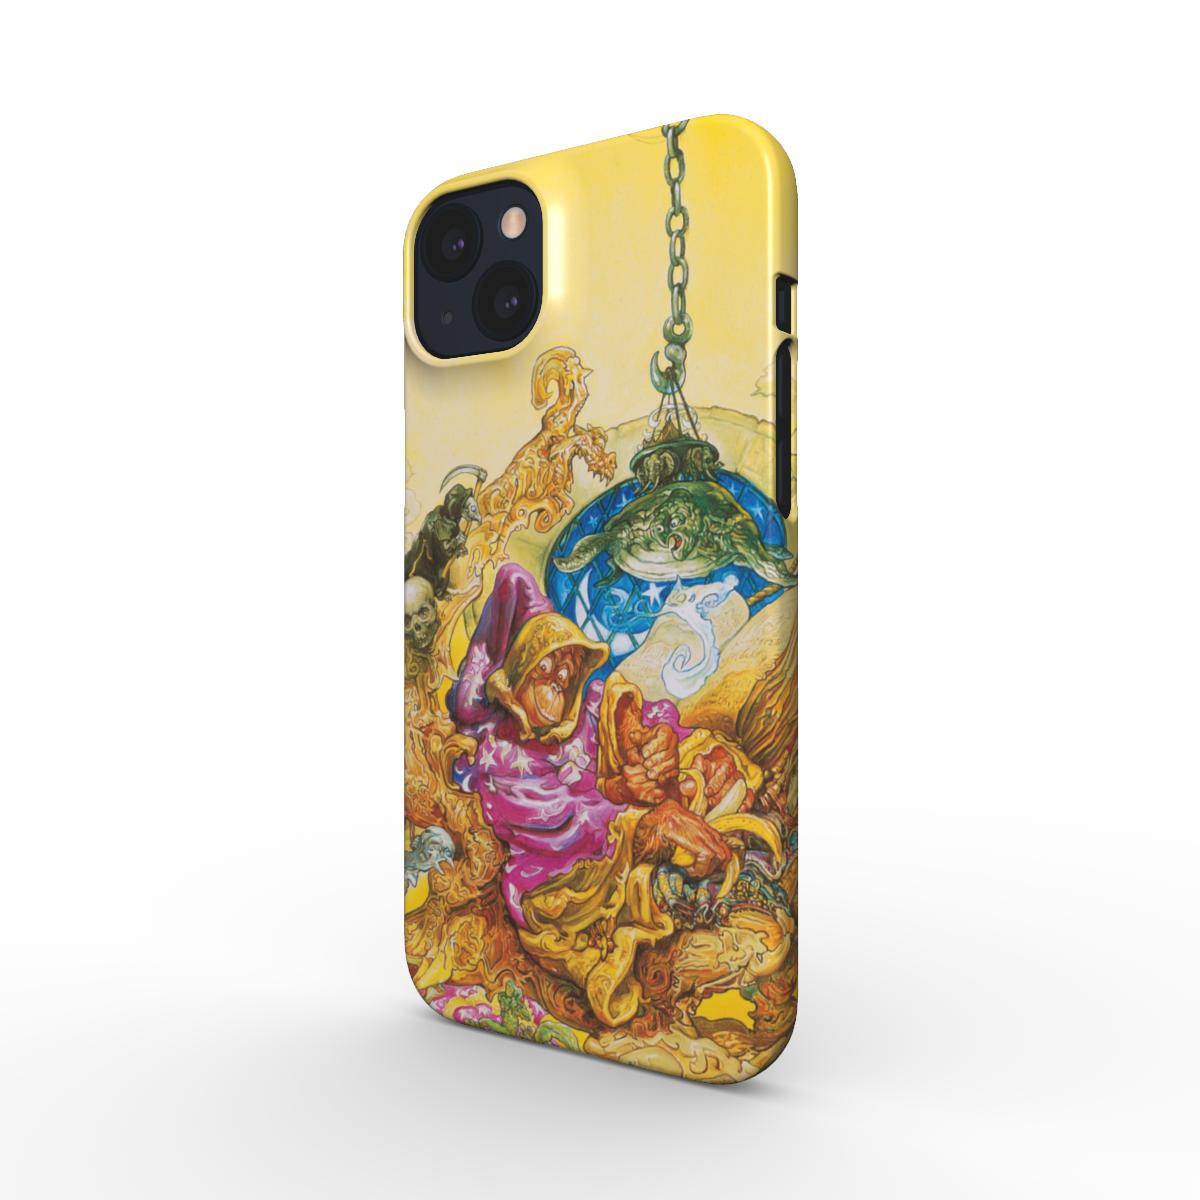 Discworld Companion (The Librarian) | Snap On Phone Case